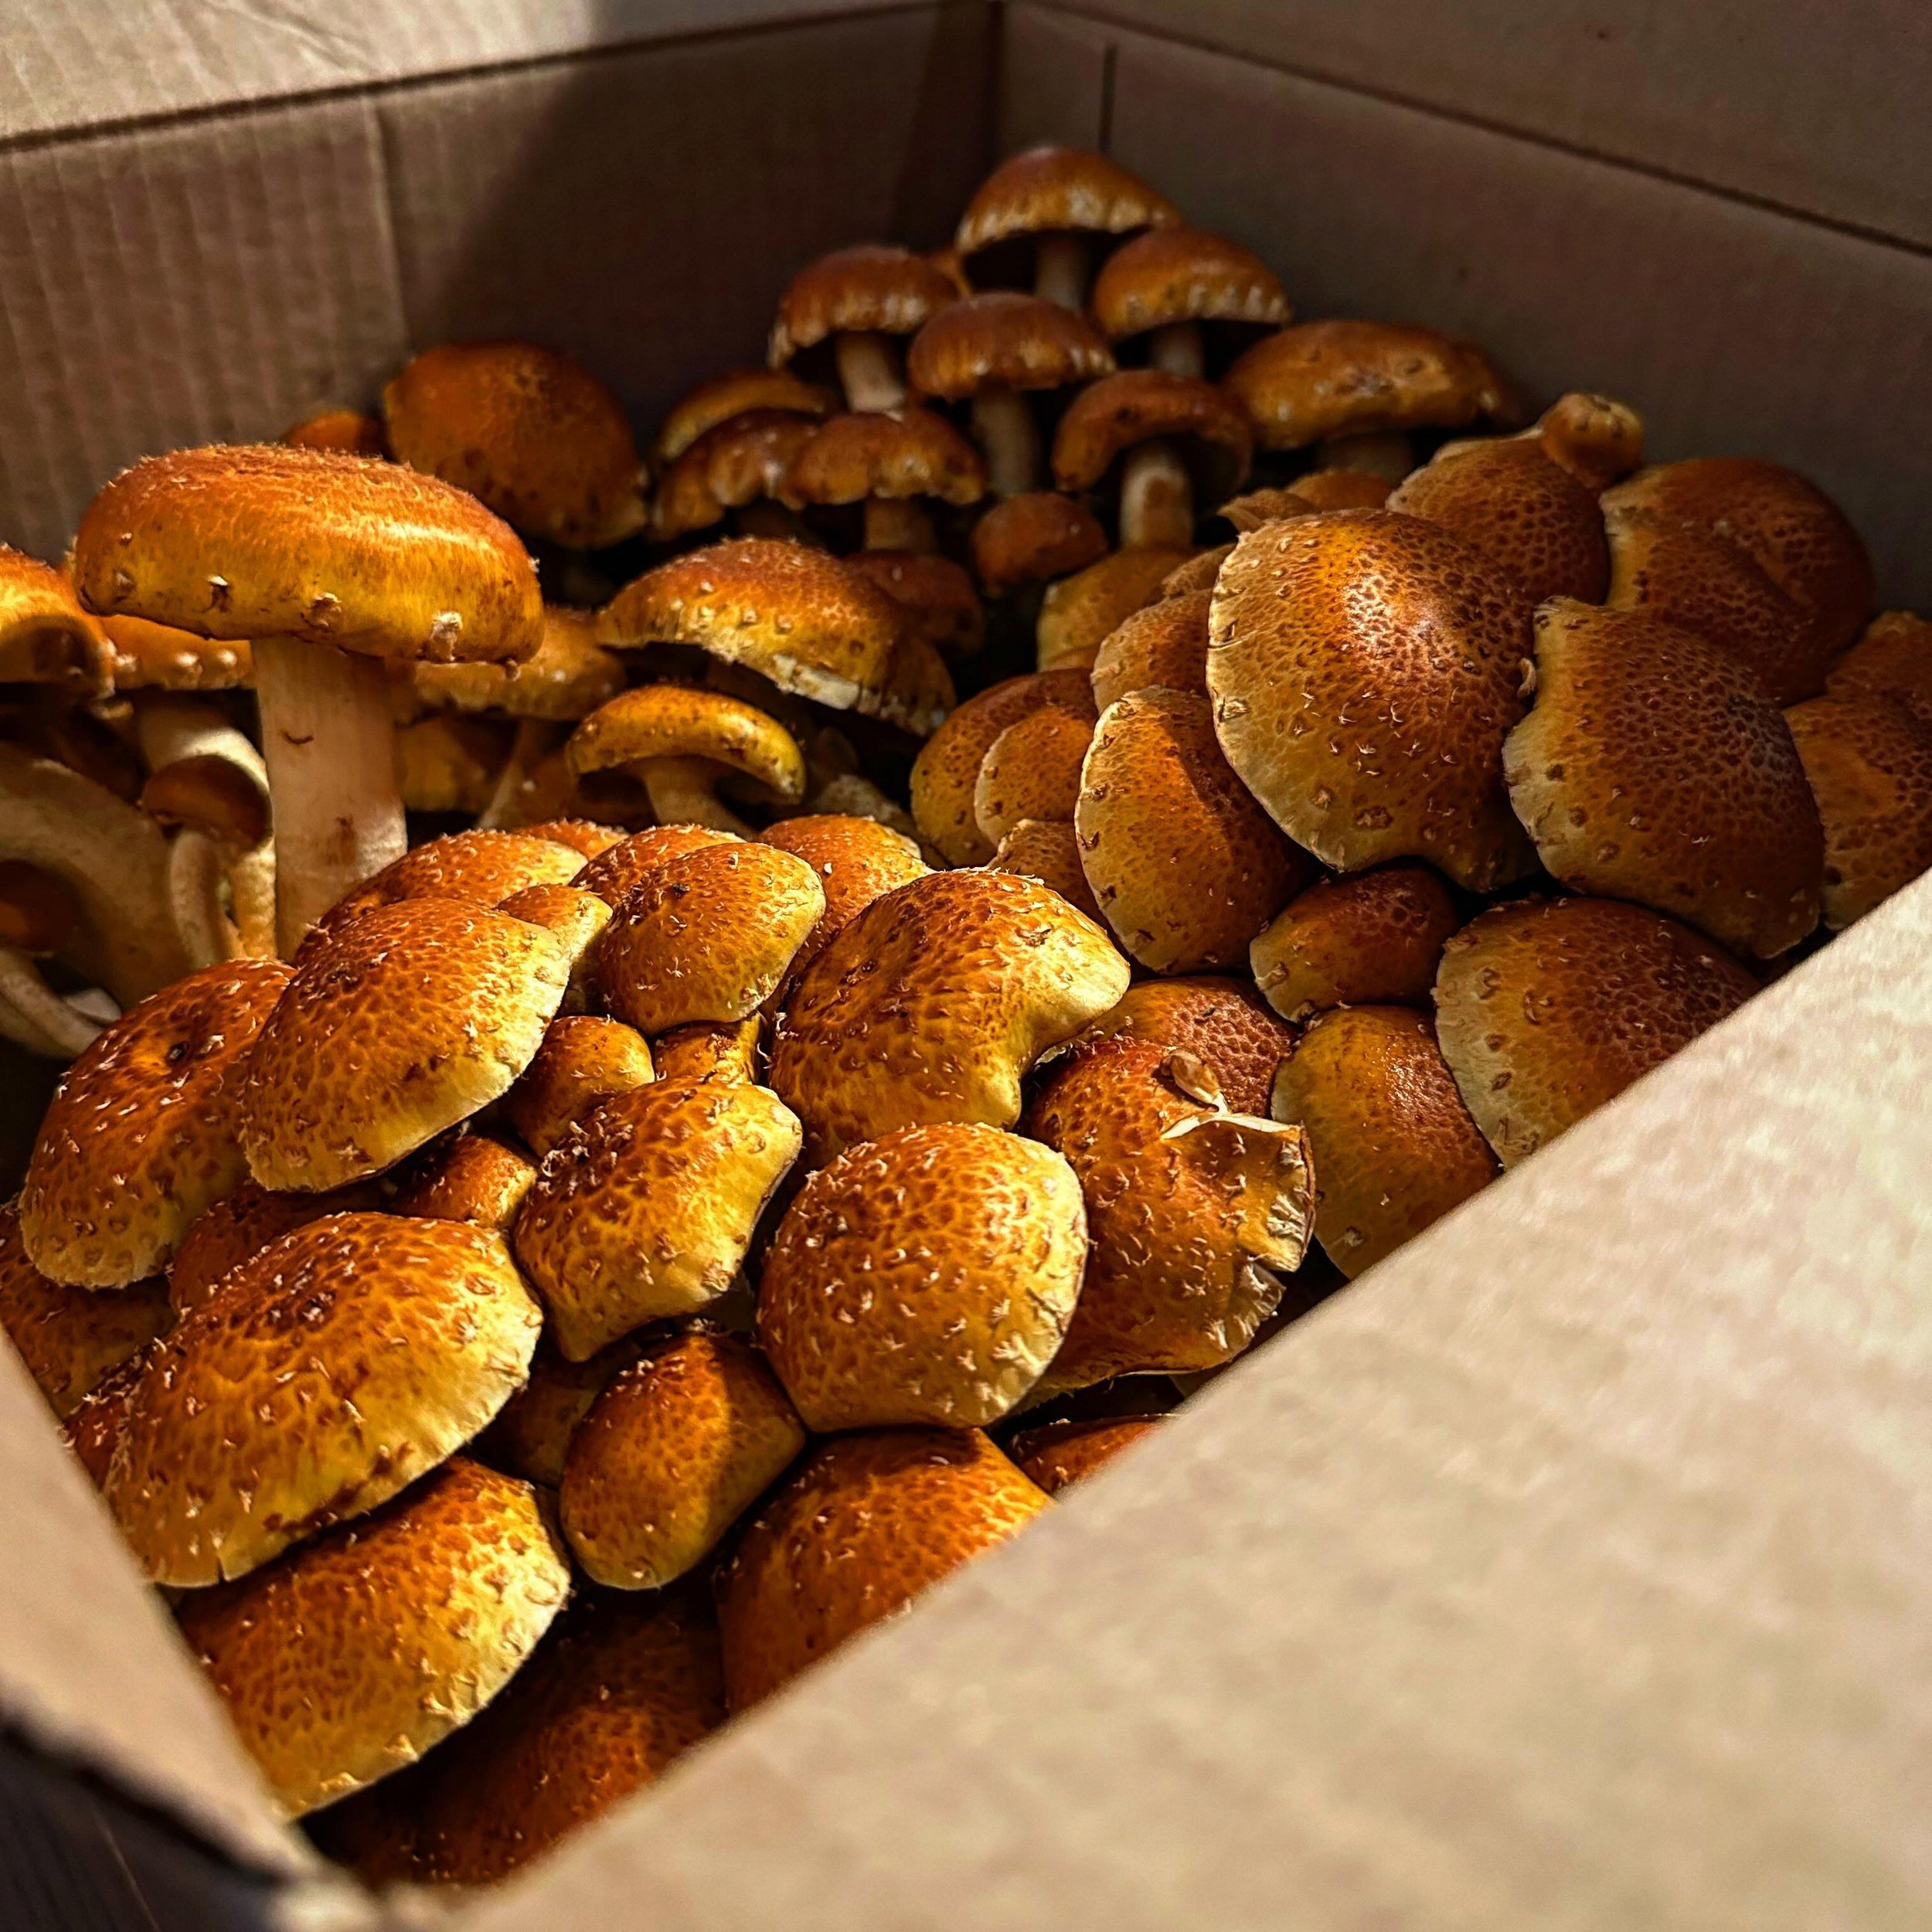 We promise, these are real mushrooms! How do we do it? 👇 

At Heartee Foods, we pride ourselves on cultivating mushrooms that not only taste exquisite but also bring the essence of nature directly to your plate. Our chestnut mushrooms are a prime ex